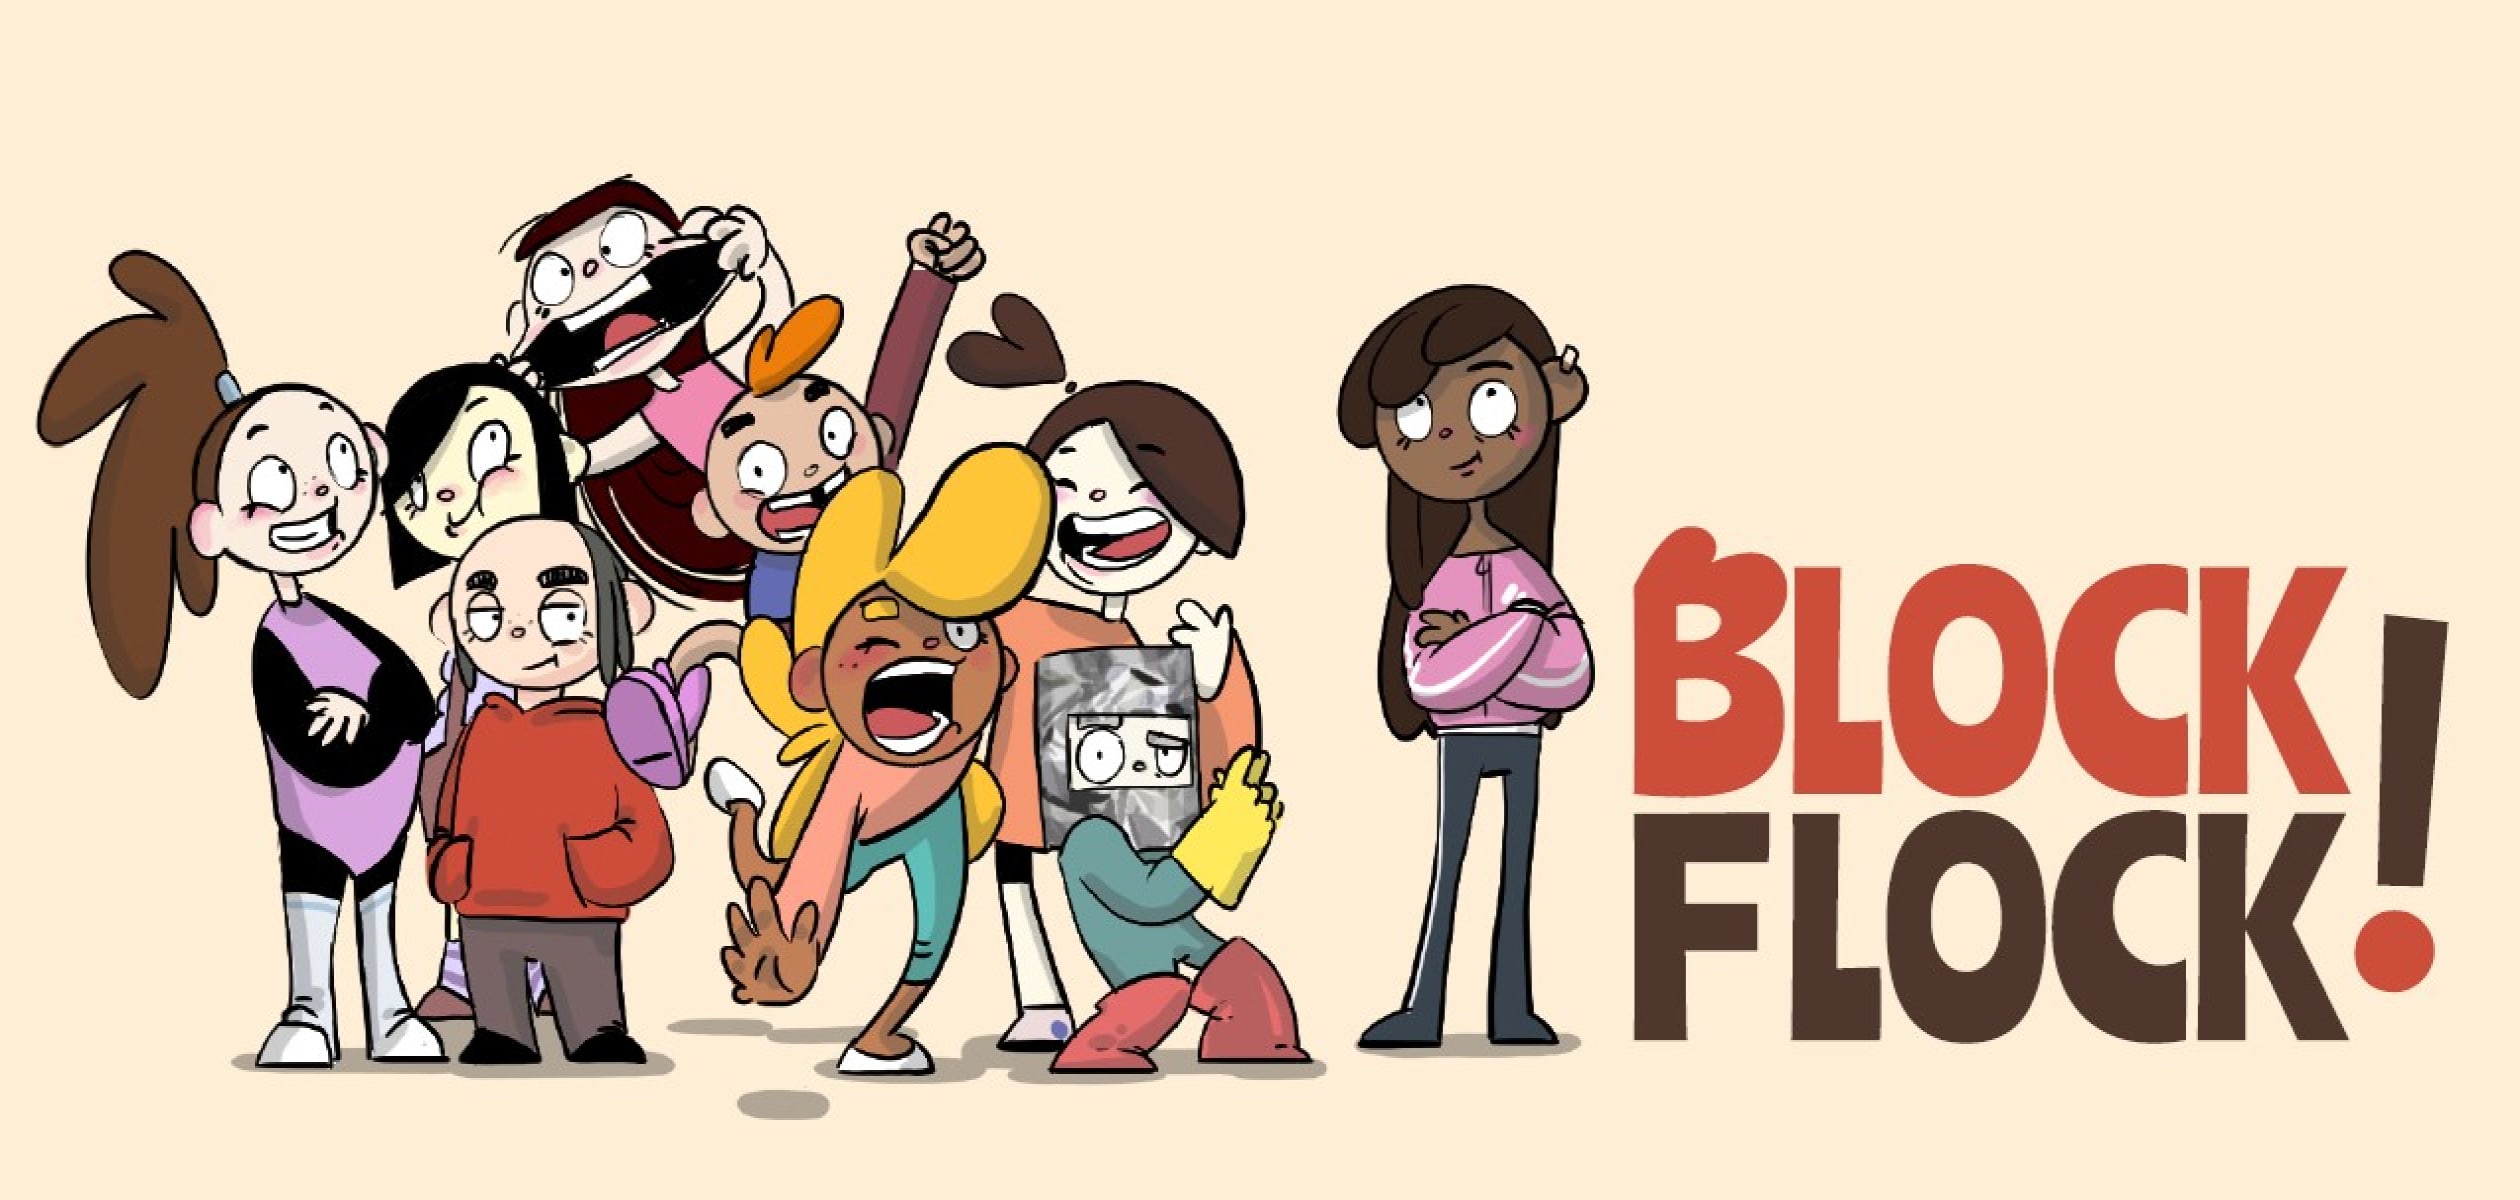 The Block Flock a one-on-one role-playing engagement through amusing stories and immersive experiences.